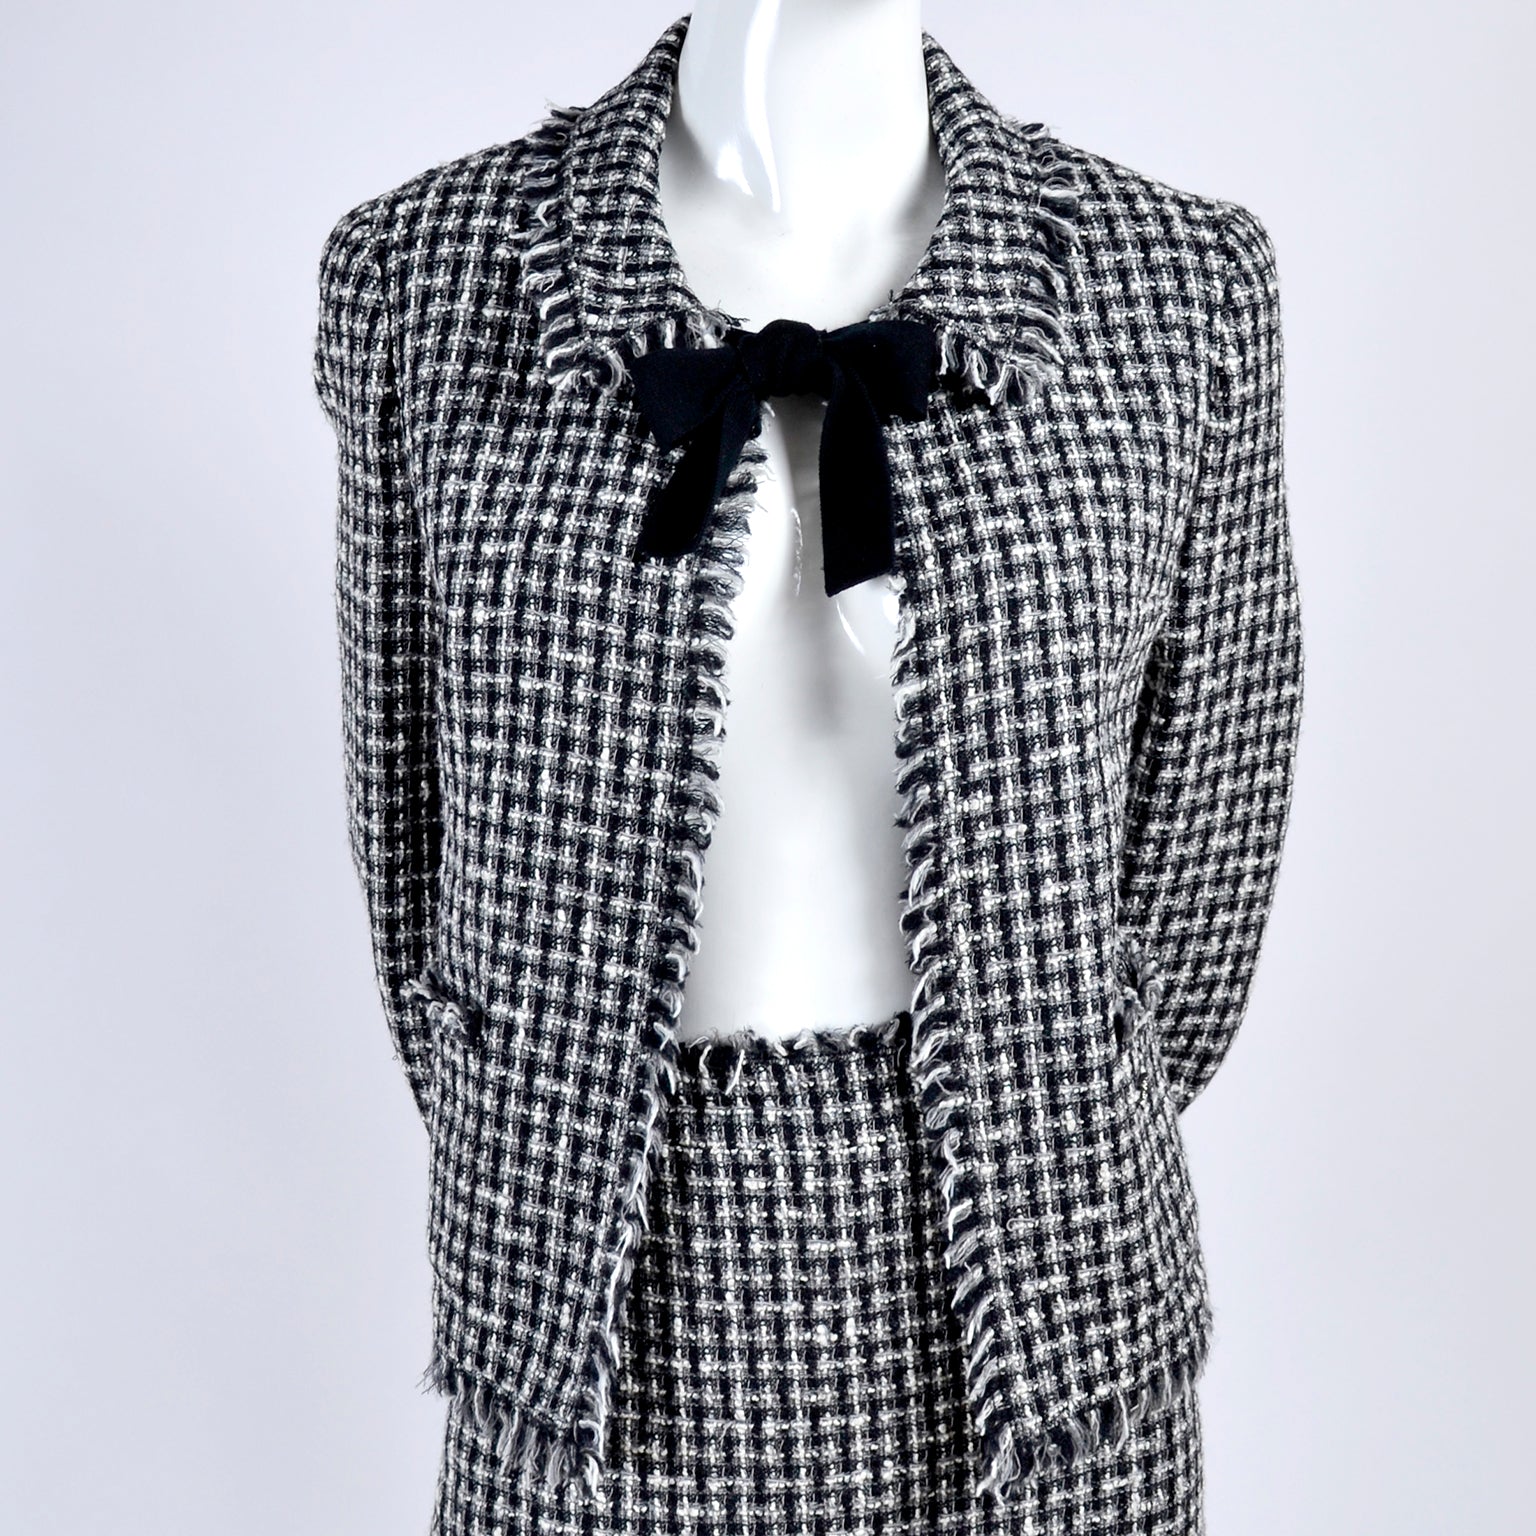 Chanel Jacket & Skirt w/ Bow in Lesage Black & White Tweed from 2004 – Modig